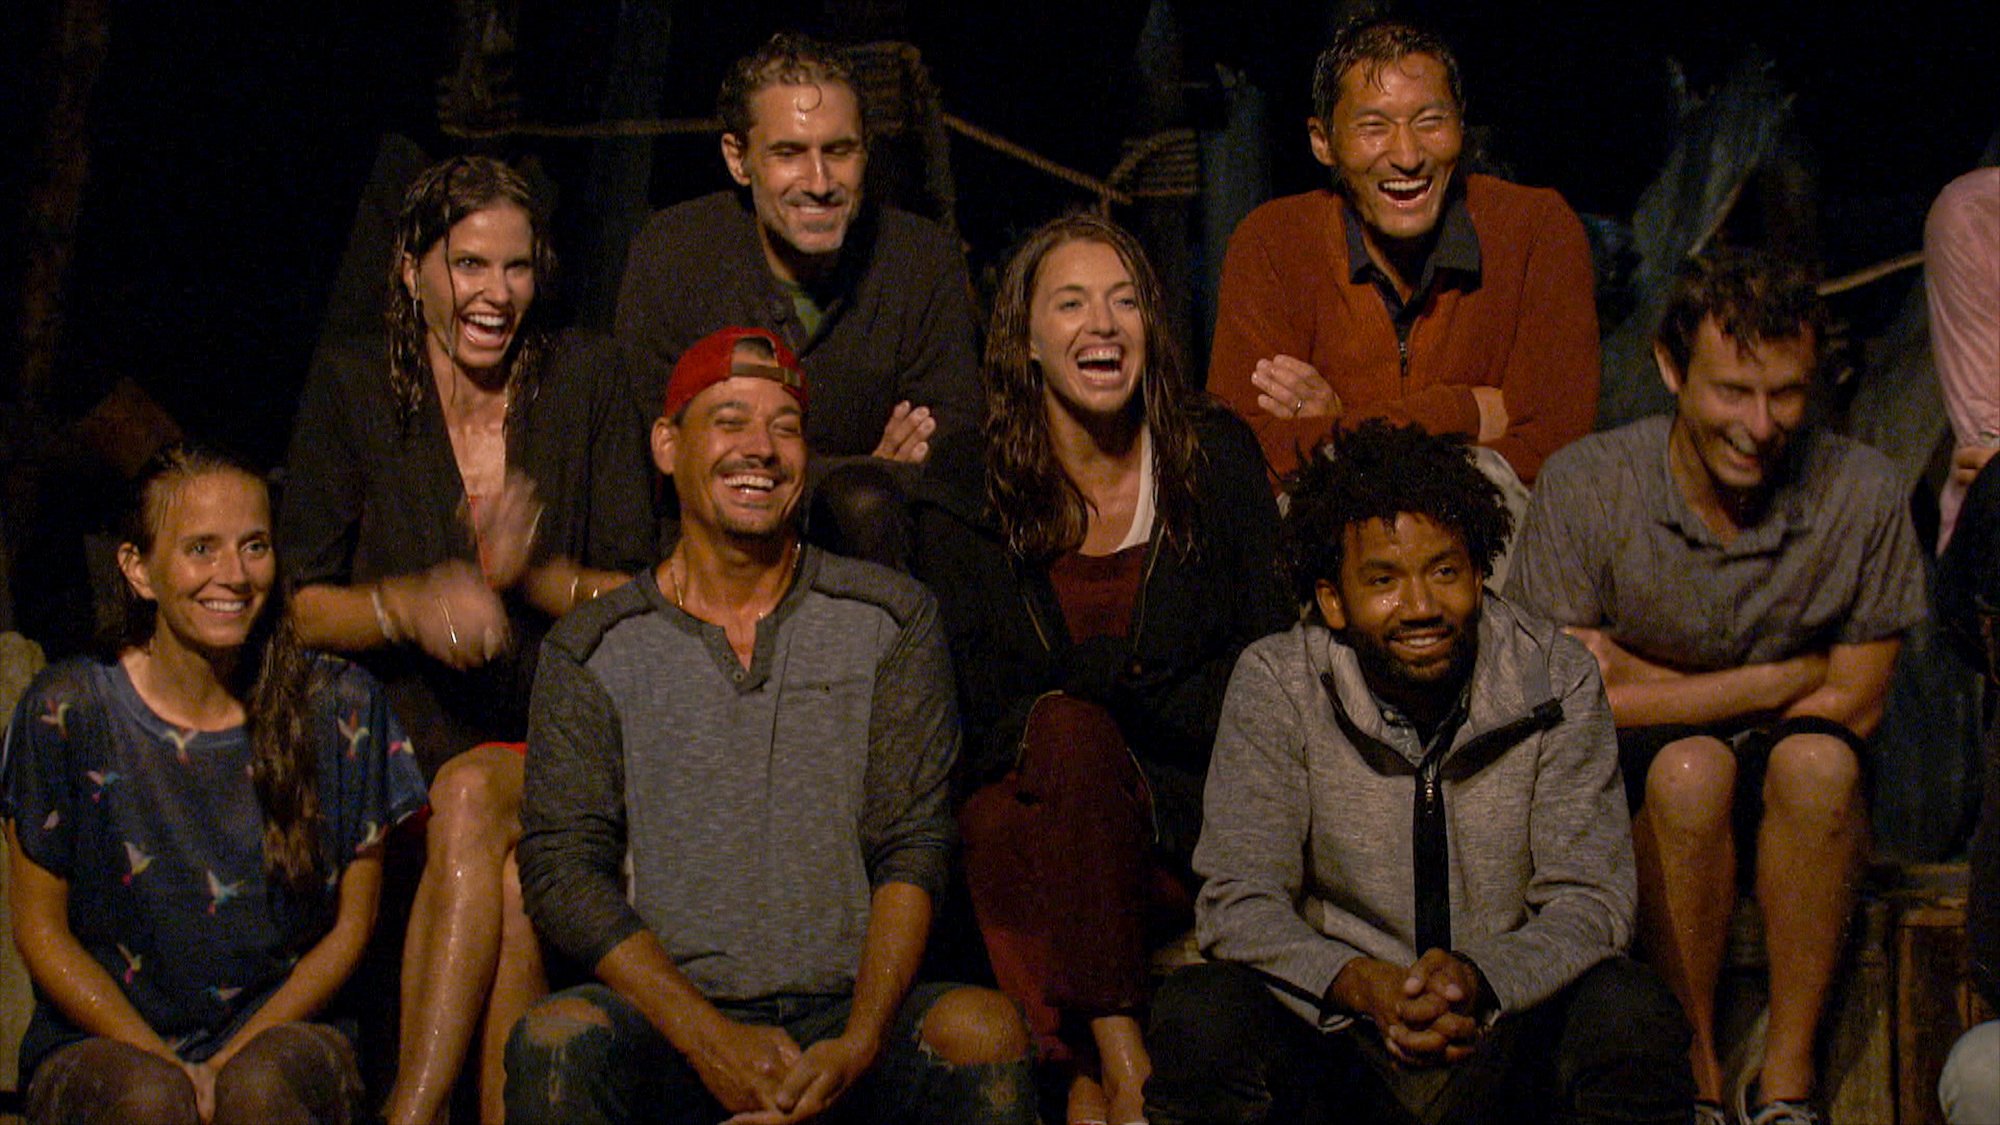 (L-R) Amber Brkich Mariano, Danni Boatwright, Boston Rob Mariano, Ethan Zohn, Parvati Shallow, Yul Kwon, Wendell Holland and Adam Klein at Tribal Council